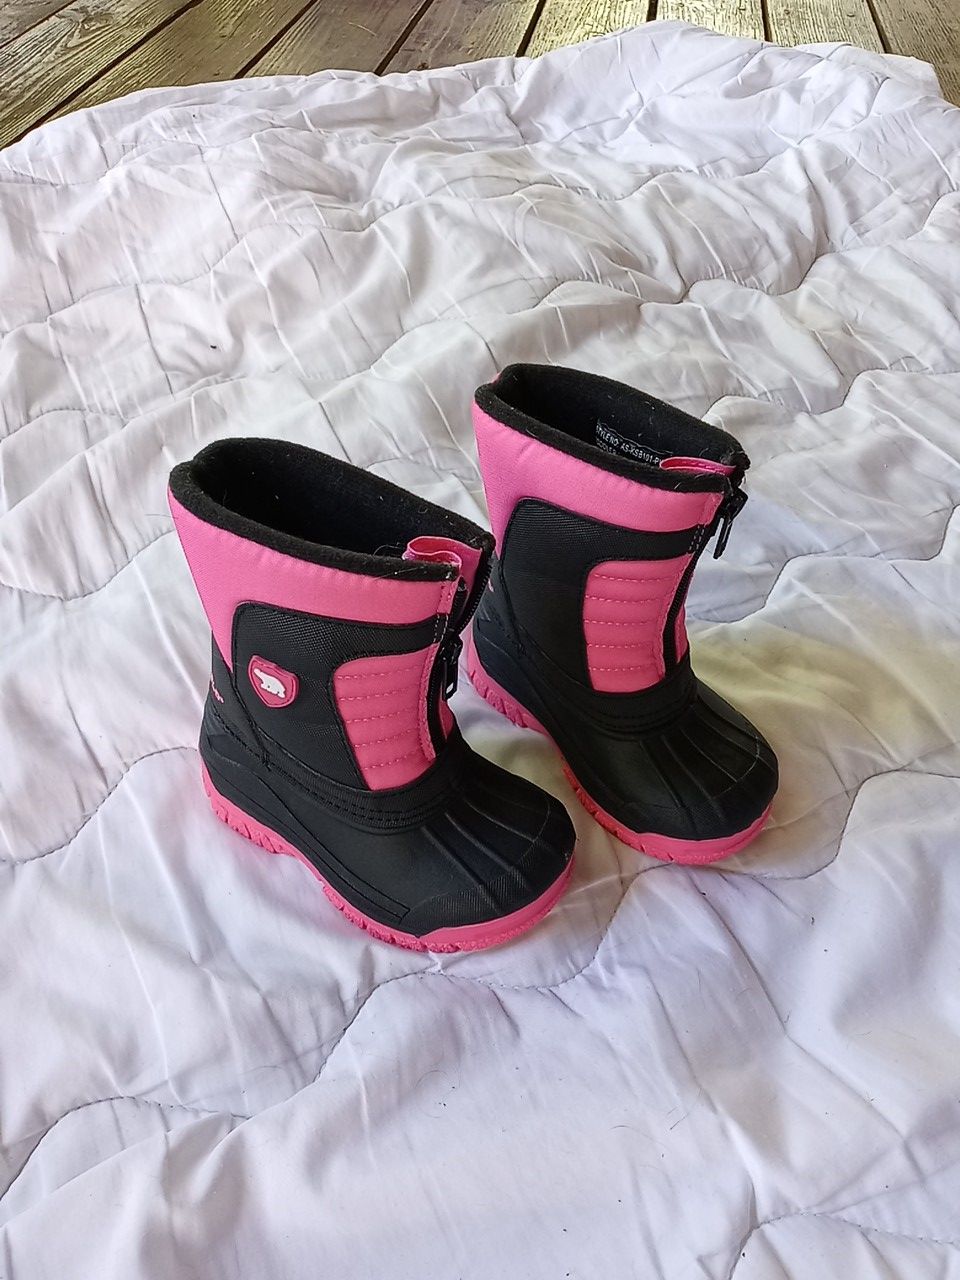 Toddler snow boots size 7